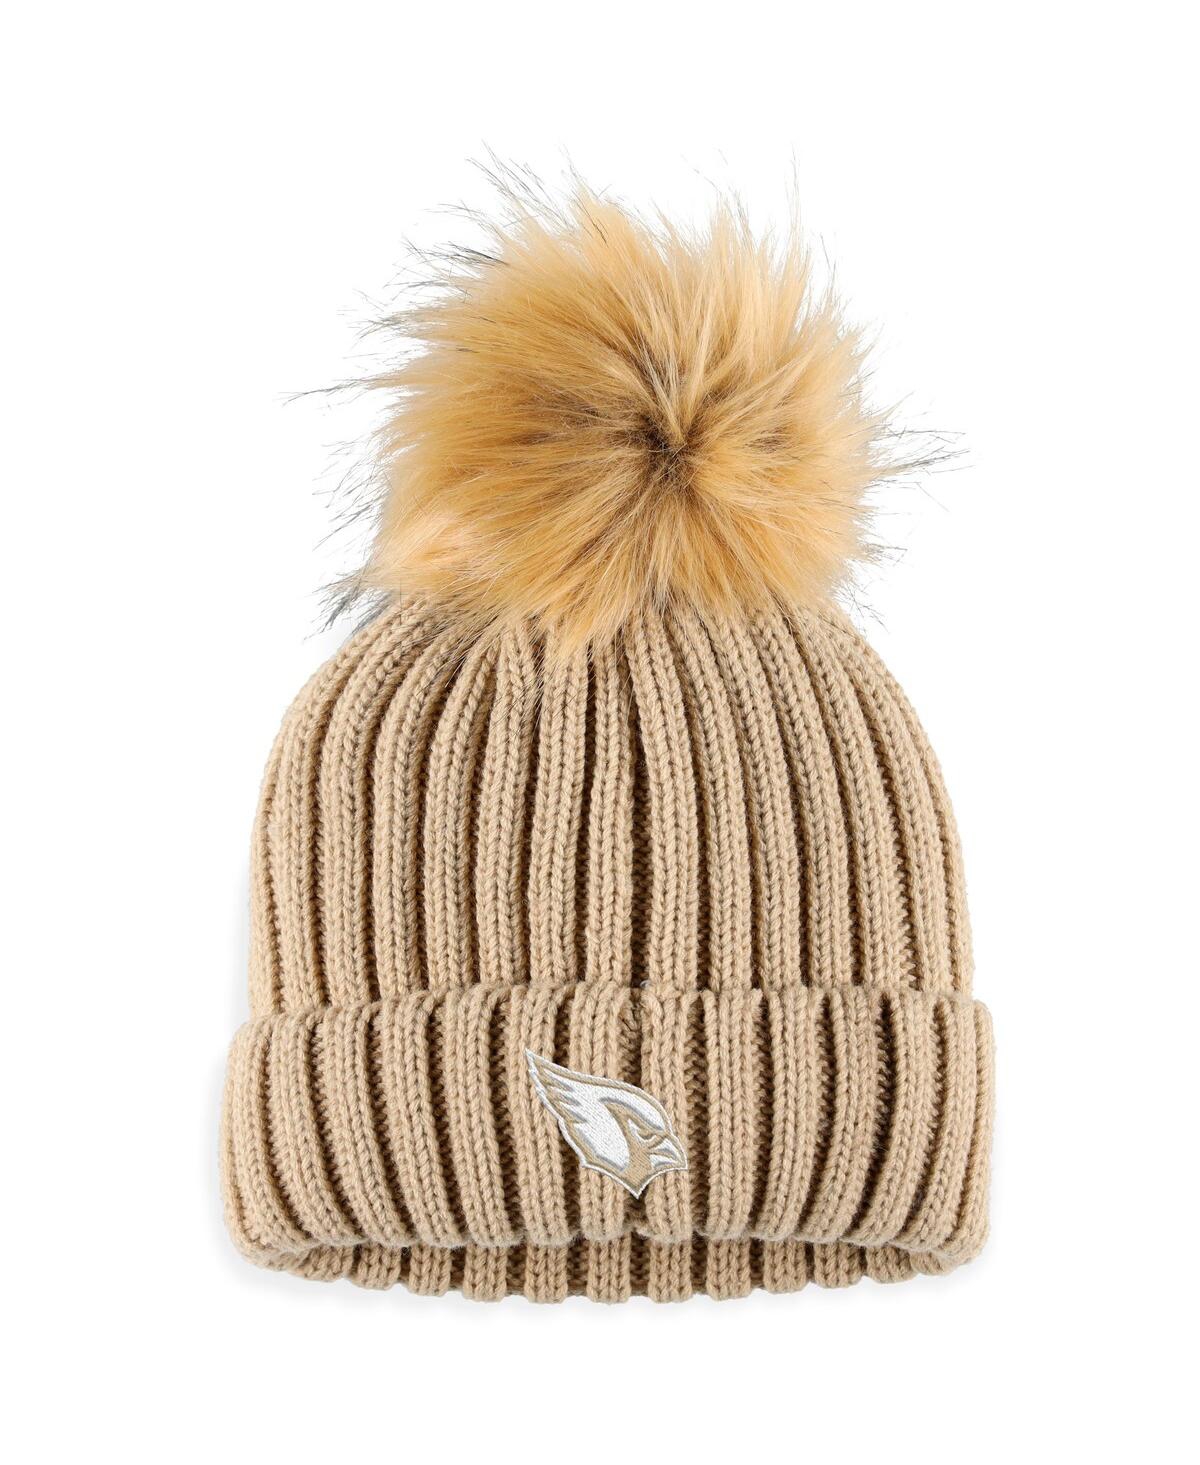 Wear By Erin Andrews Women's  Natural Arizona Cardinals Neutral Cuffed Knit Hat With Pom